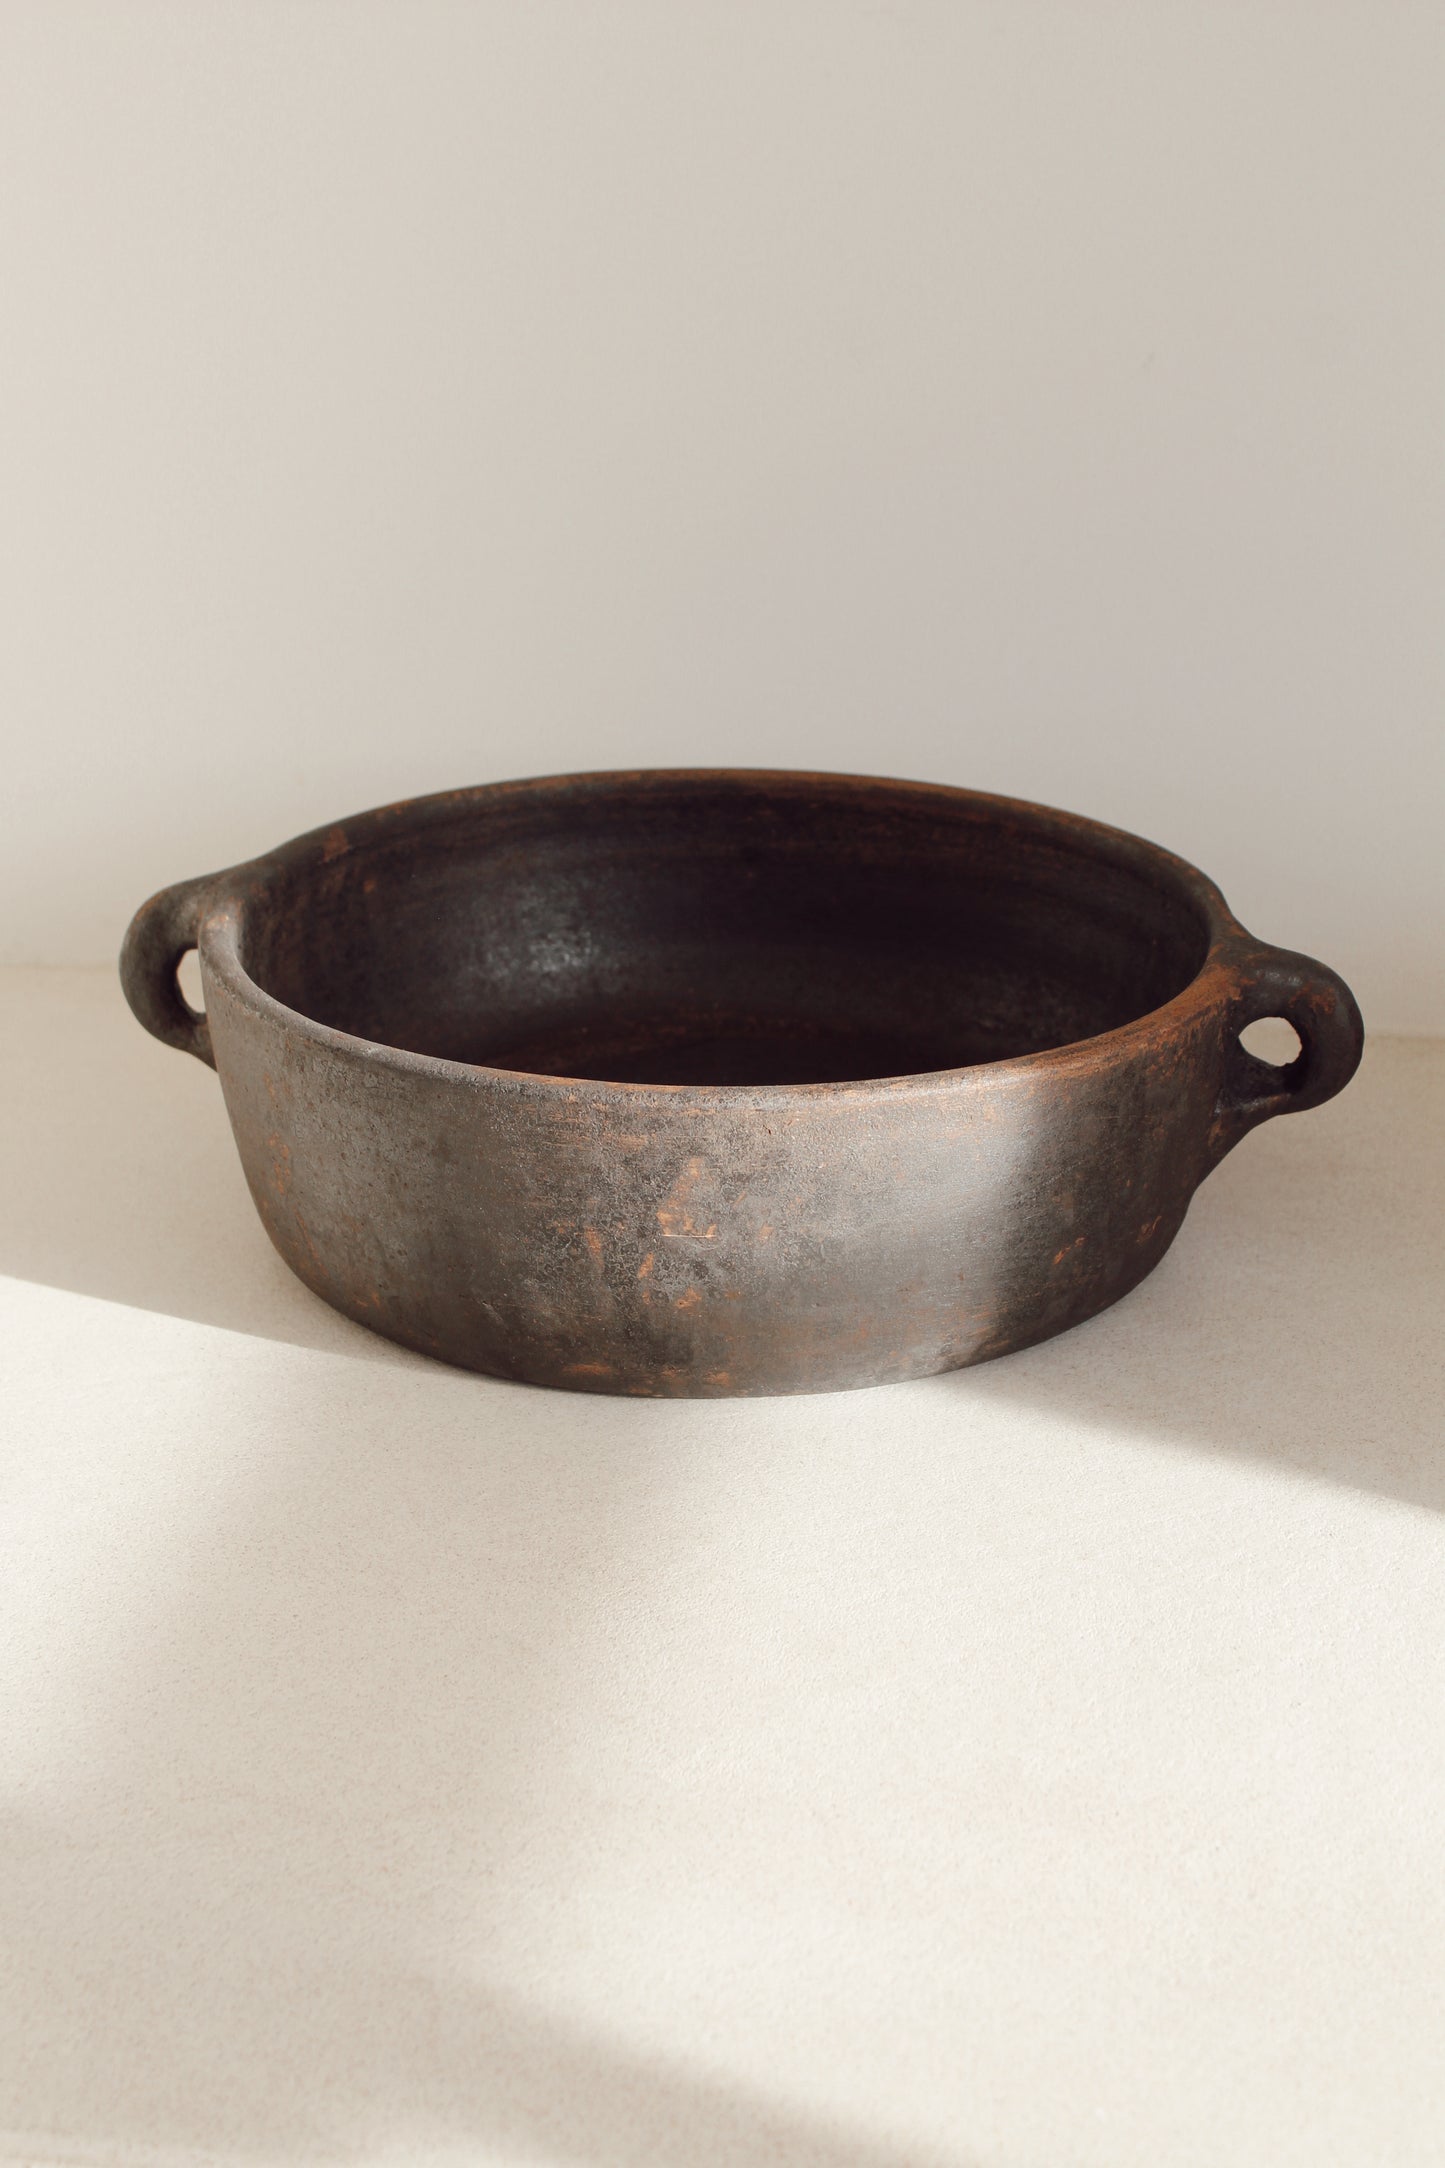 Earthern cooking tray